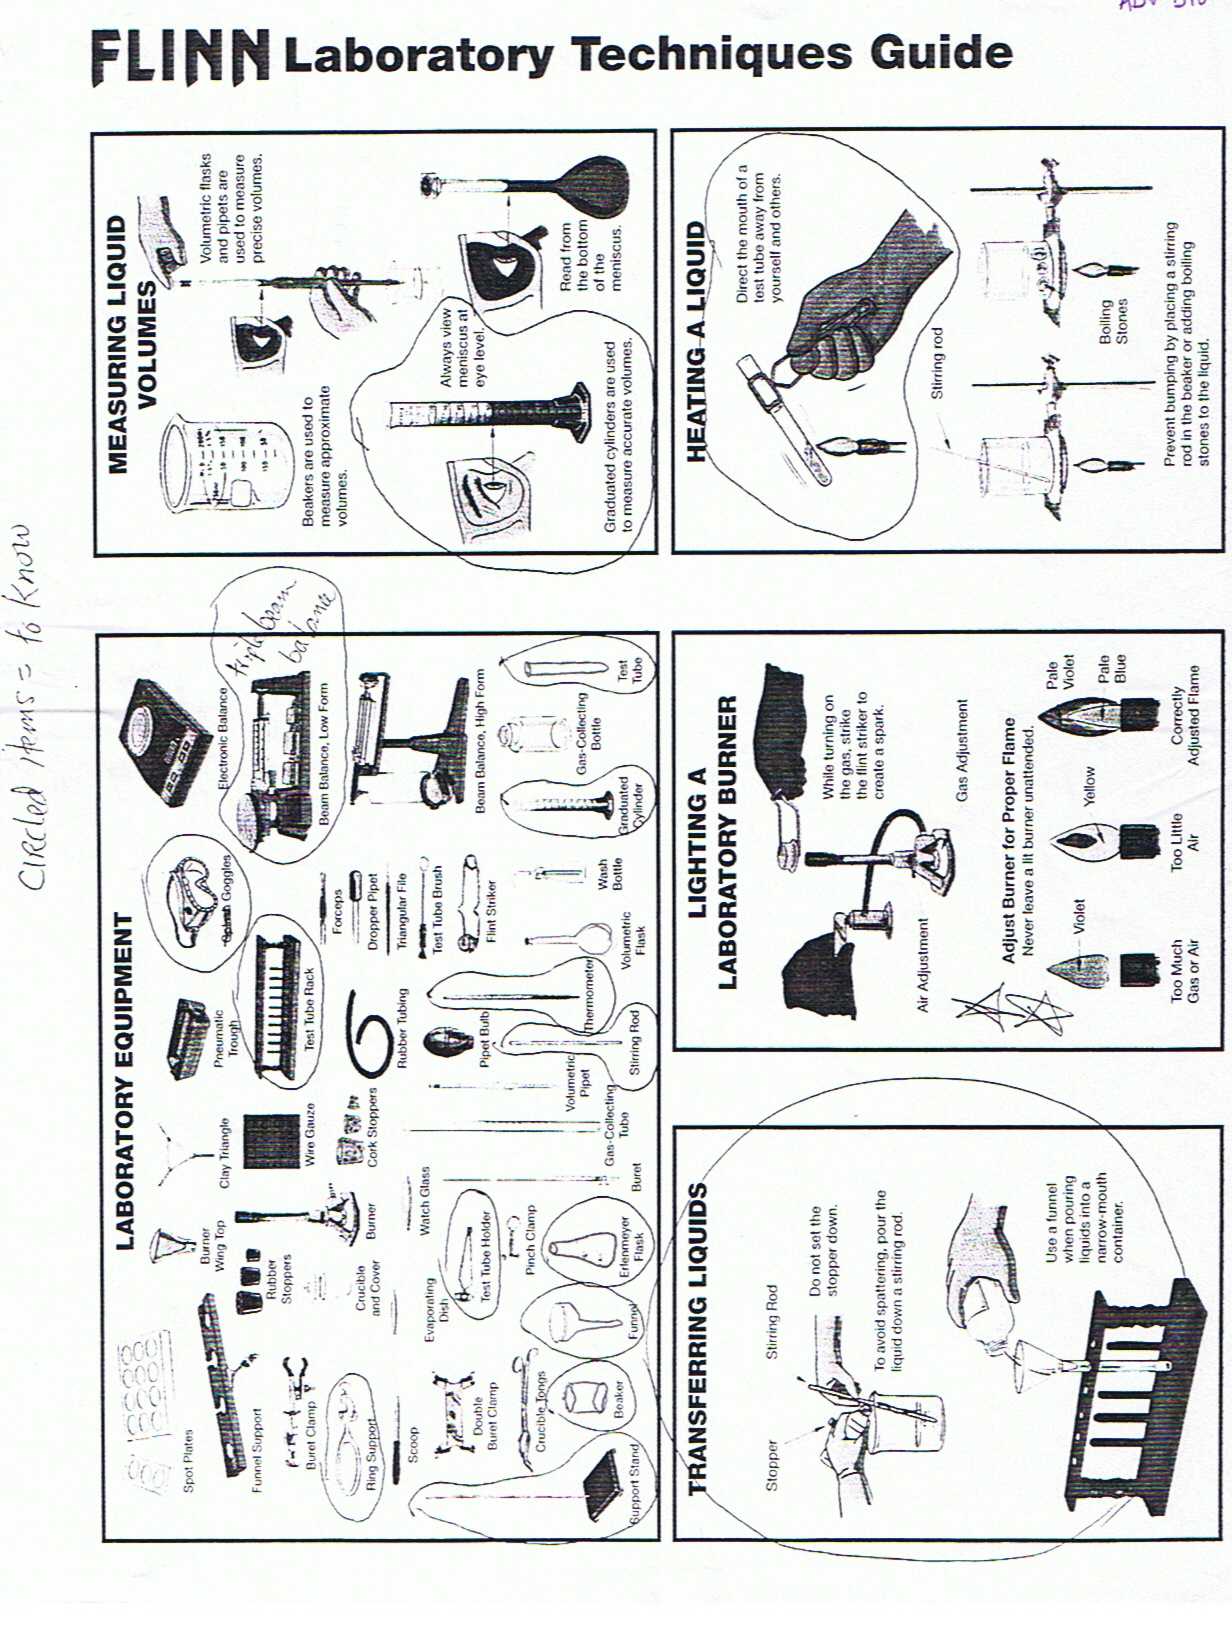 Lab Equipment Worksheet Along with Your Blog Undesirablewaif33